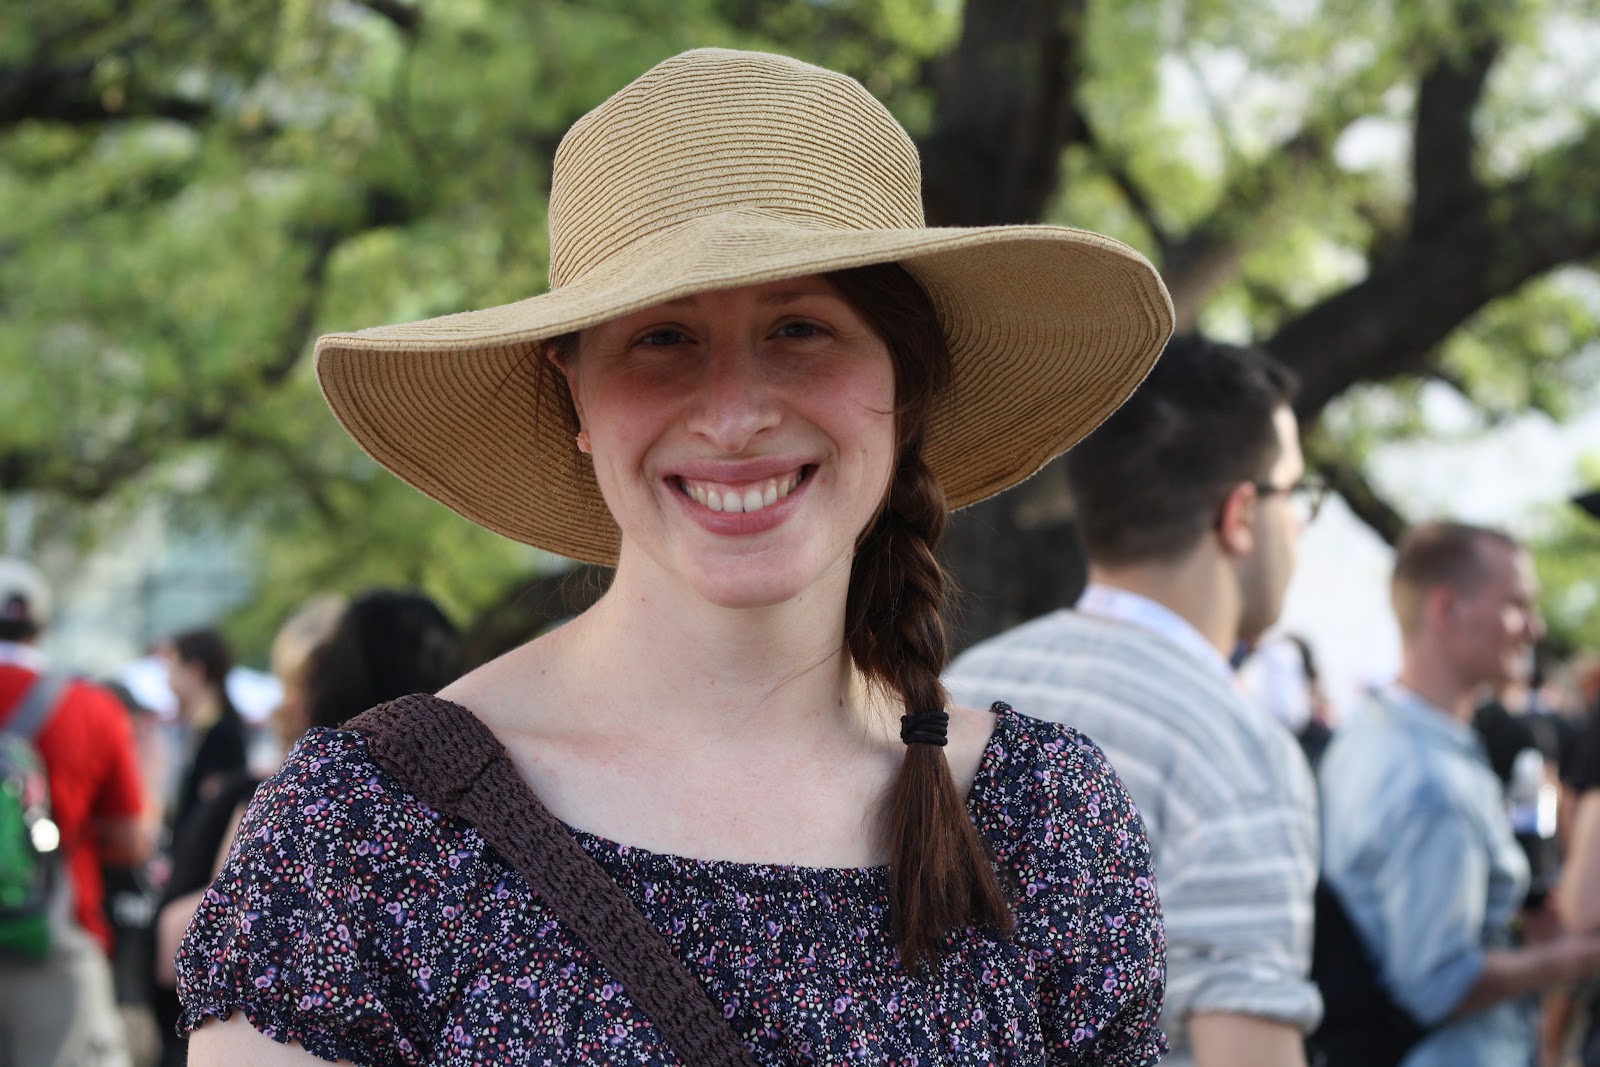 girl at sxsw wearing a wide-brim hat